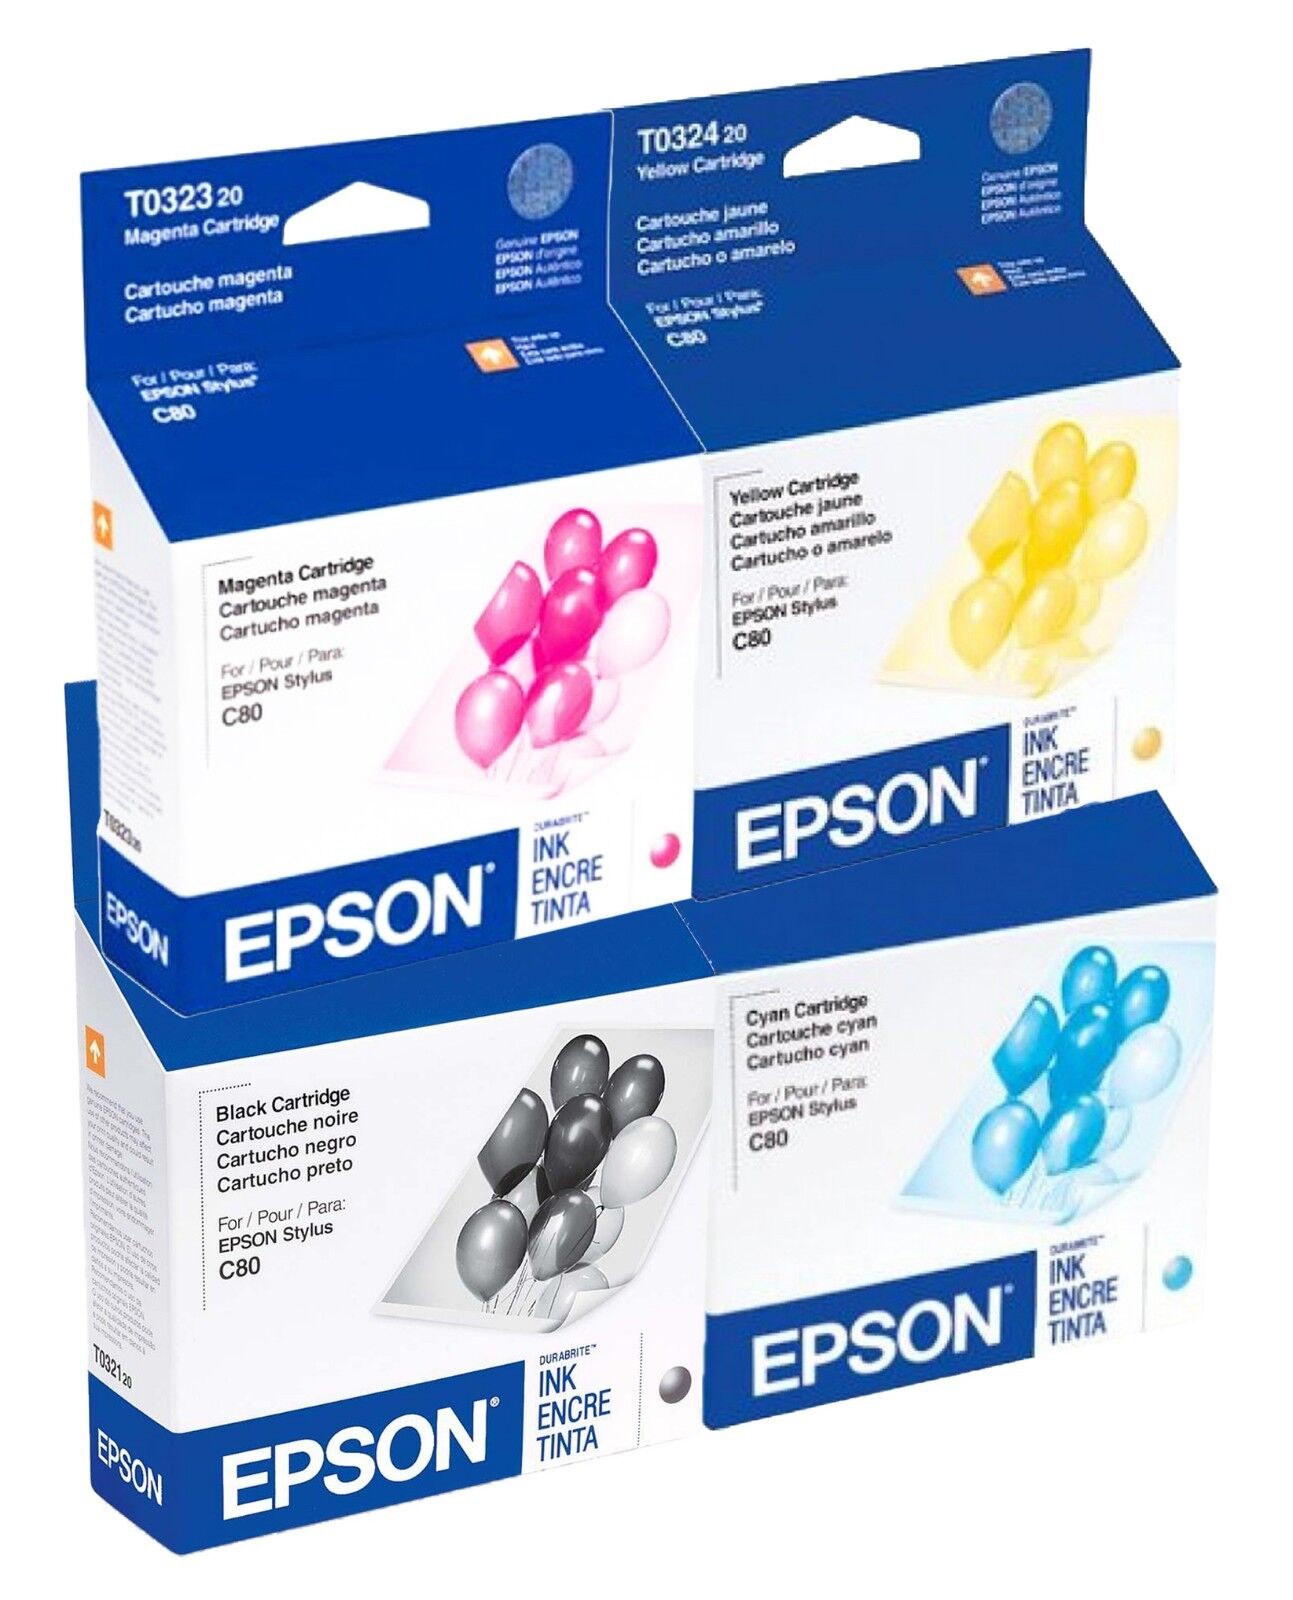 Epson 32 T0321 T0322 T0323 T0324 Ink Cartridge 4-Pack GENUINE NEW for Stylus C80